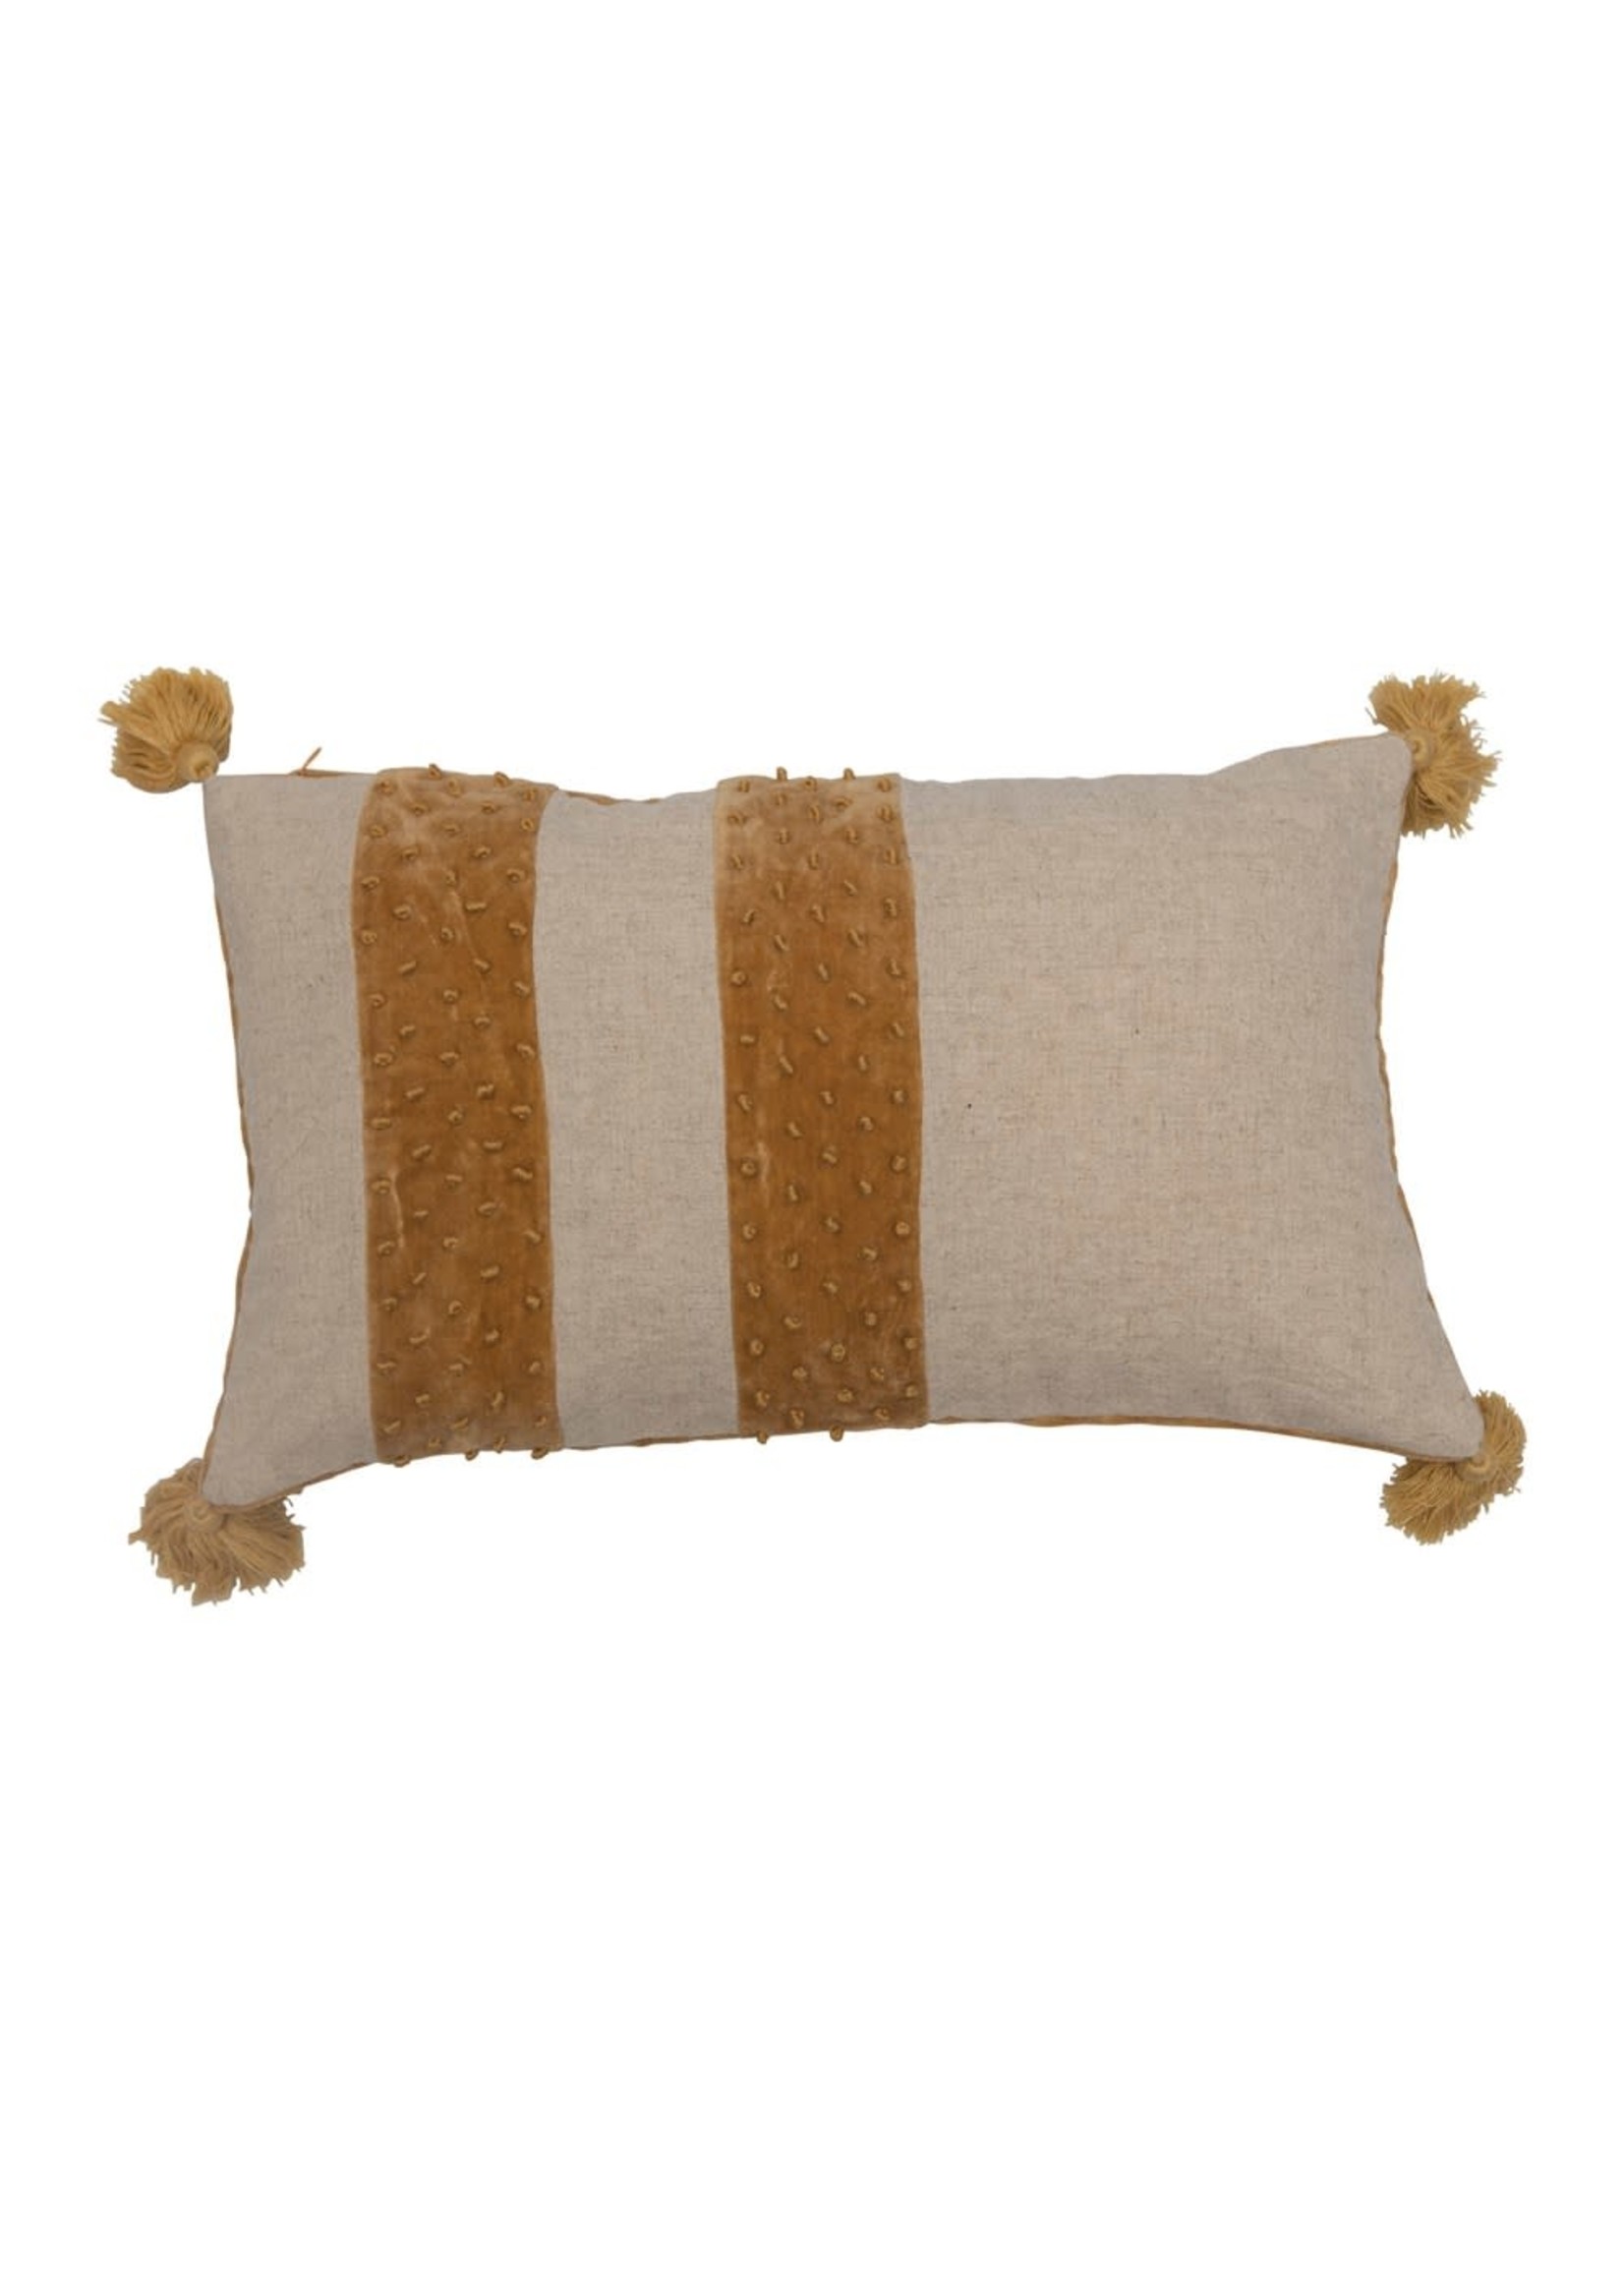 Cotton Lumbar Pillow w/ French Knots, Tassels, Velvet Stripes & Back, Natural & Mustard Color